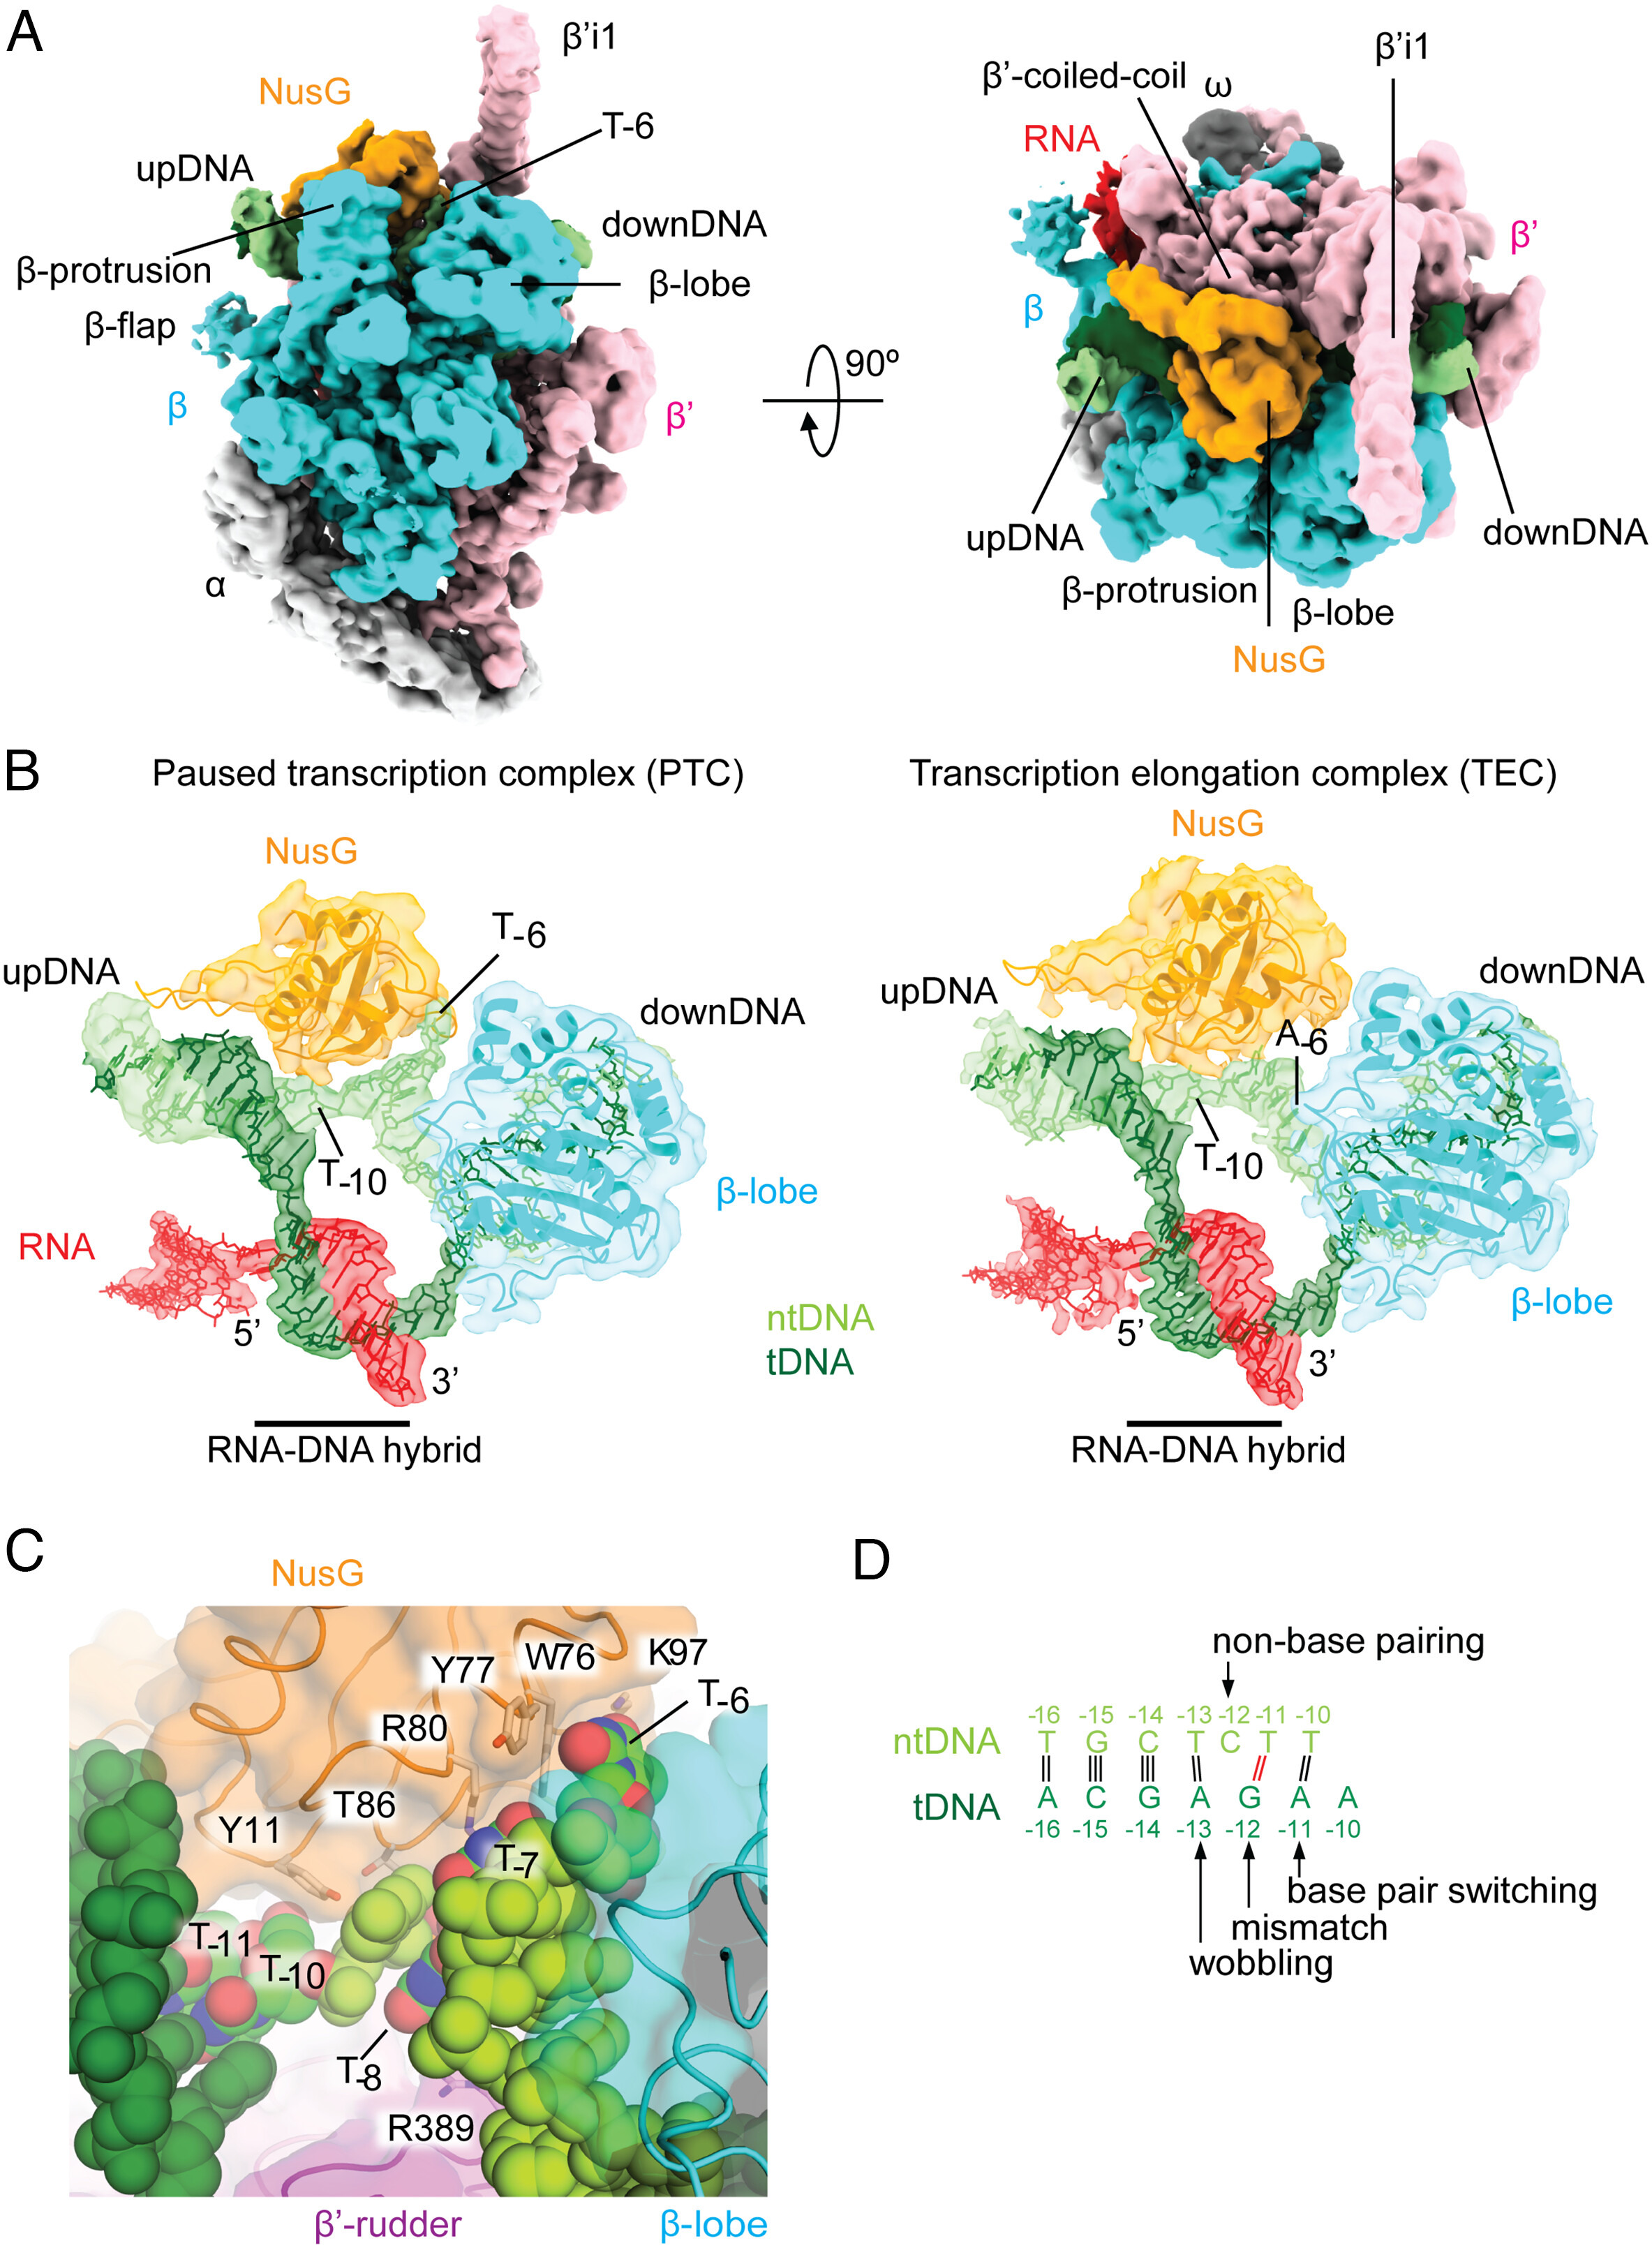 Allosteric mechanism of transcription inhibition by NusG-dependent pausing of RNA polymerase